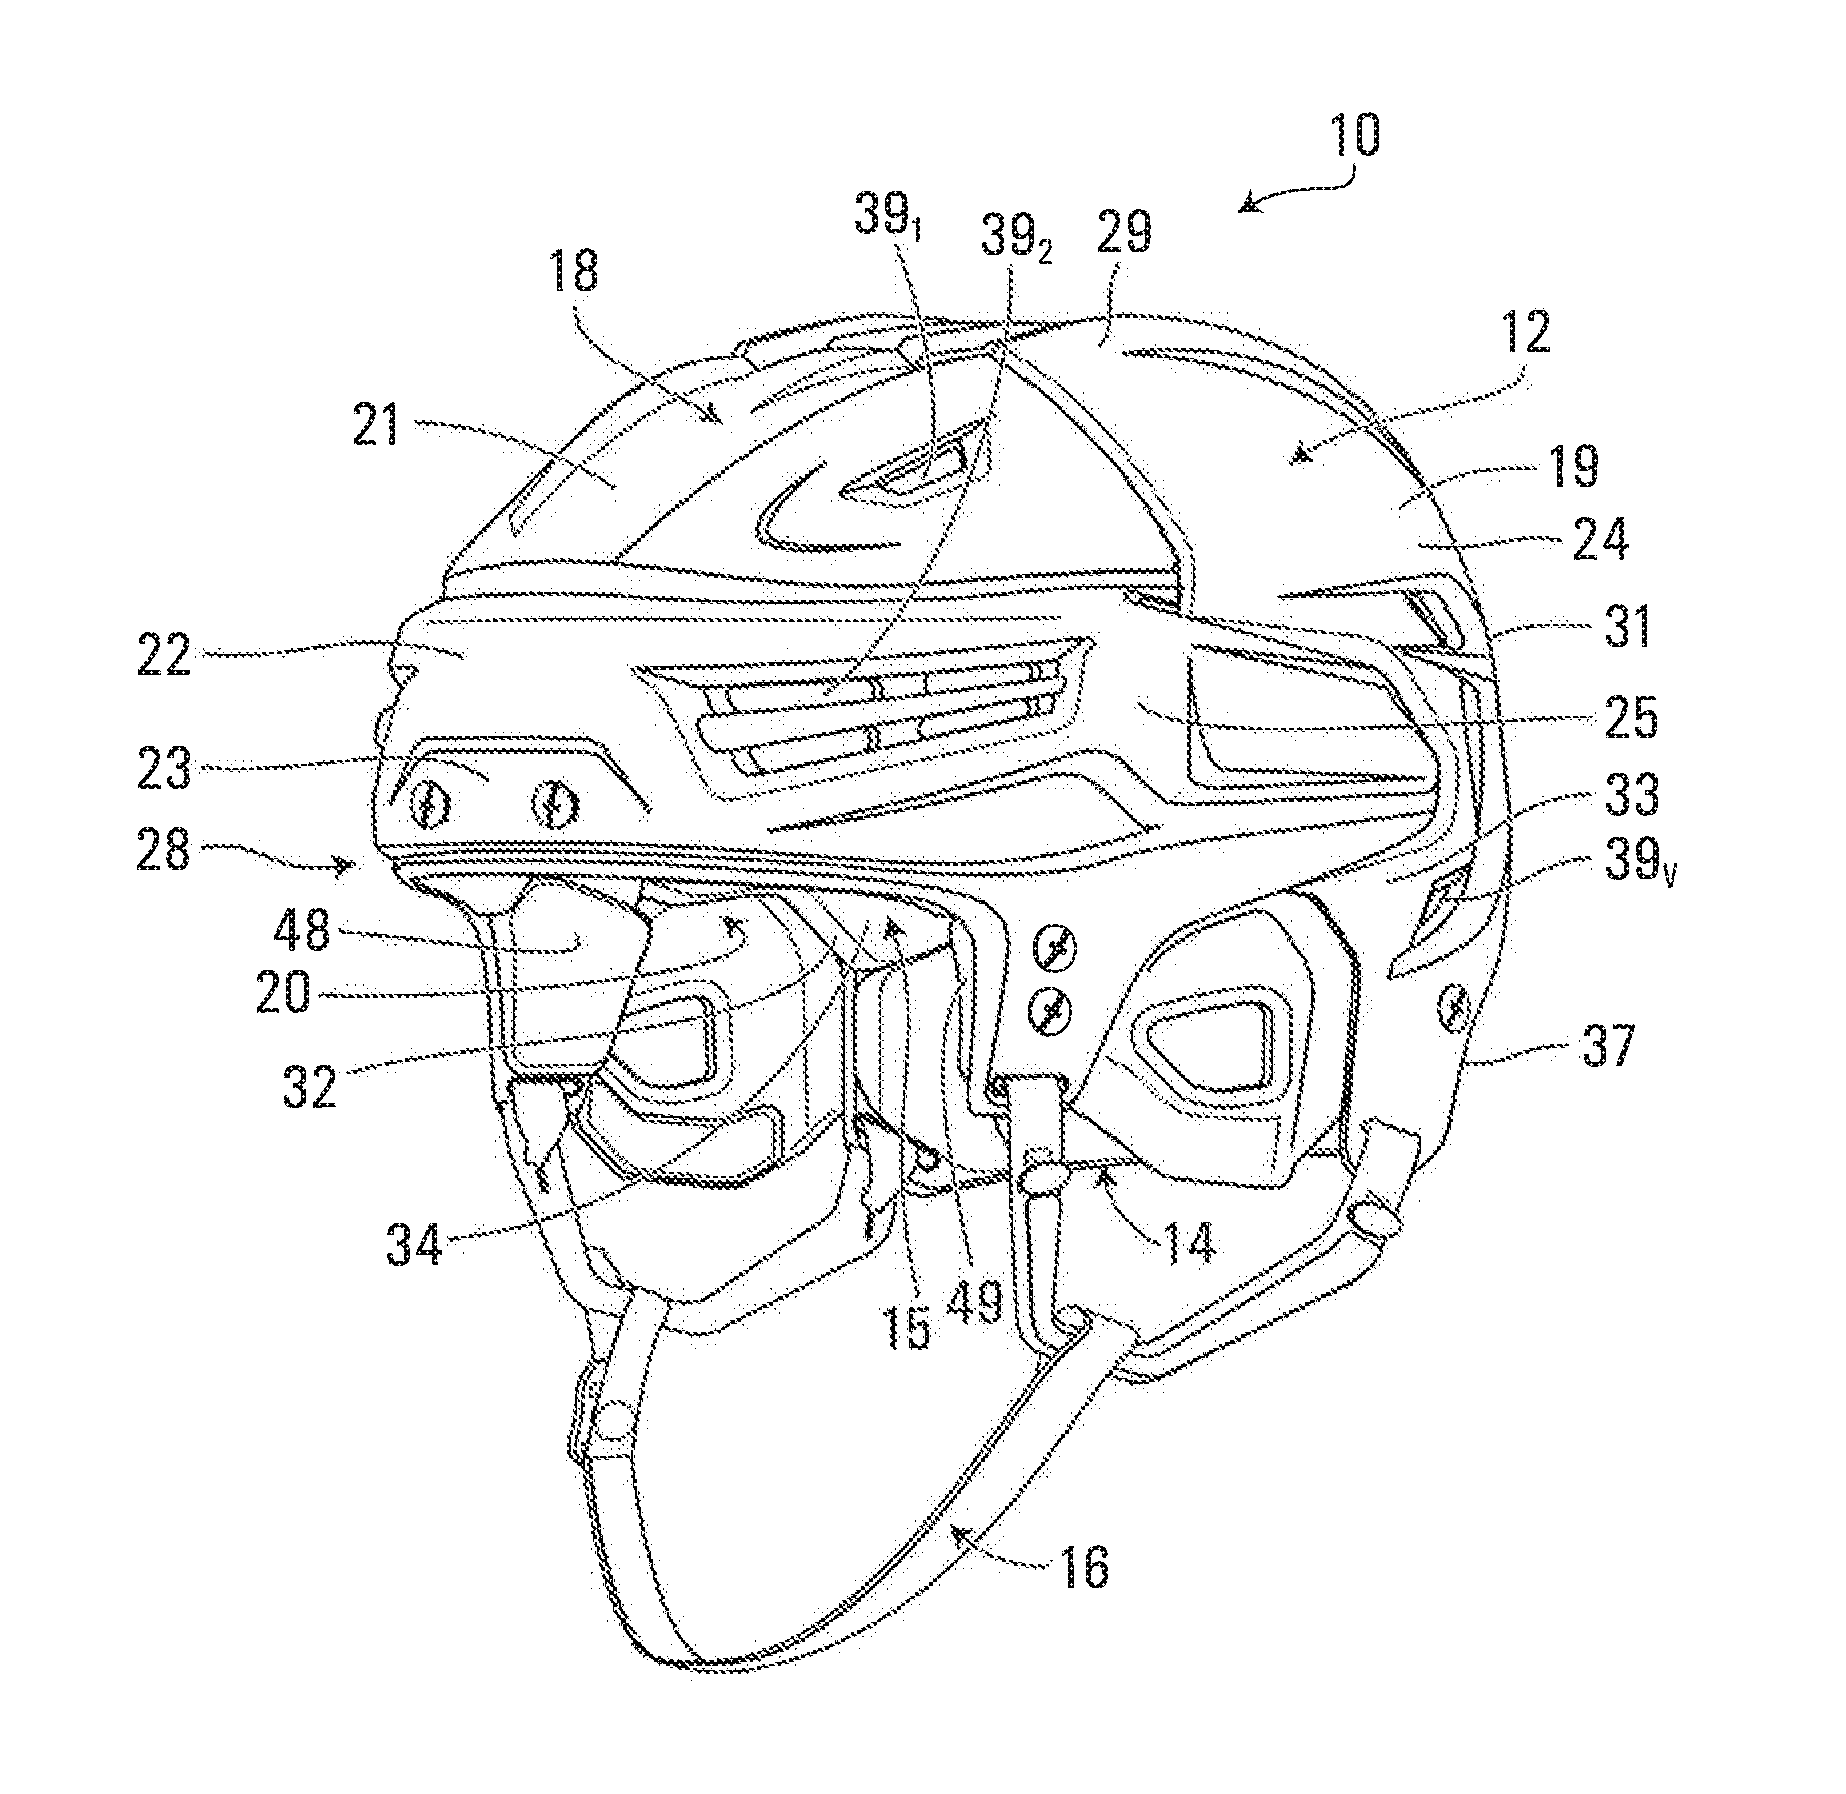 Helmet for impact protection